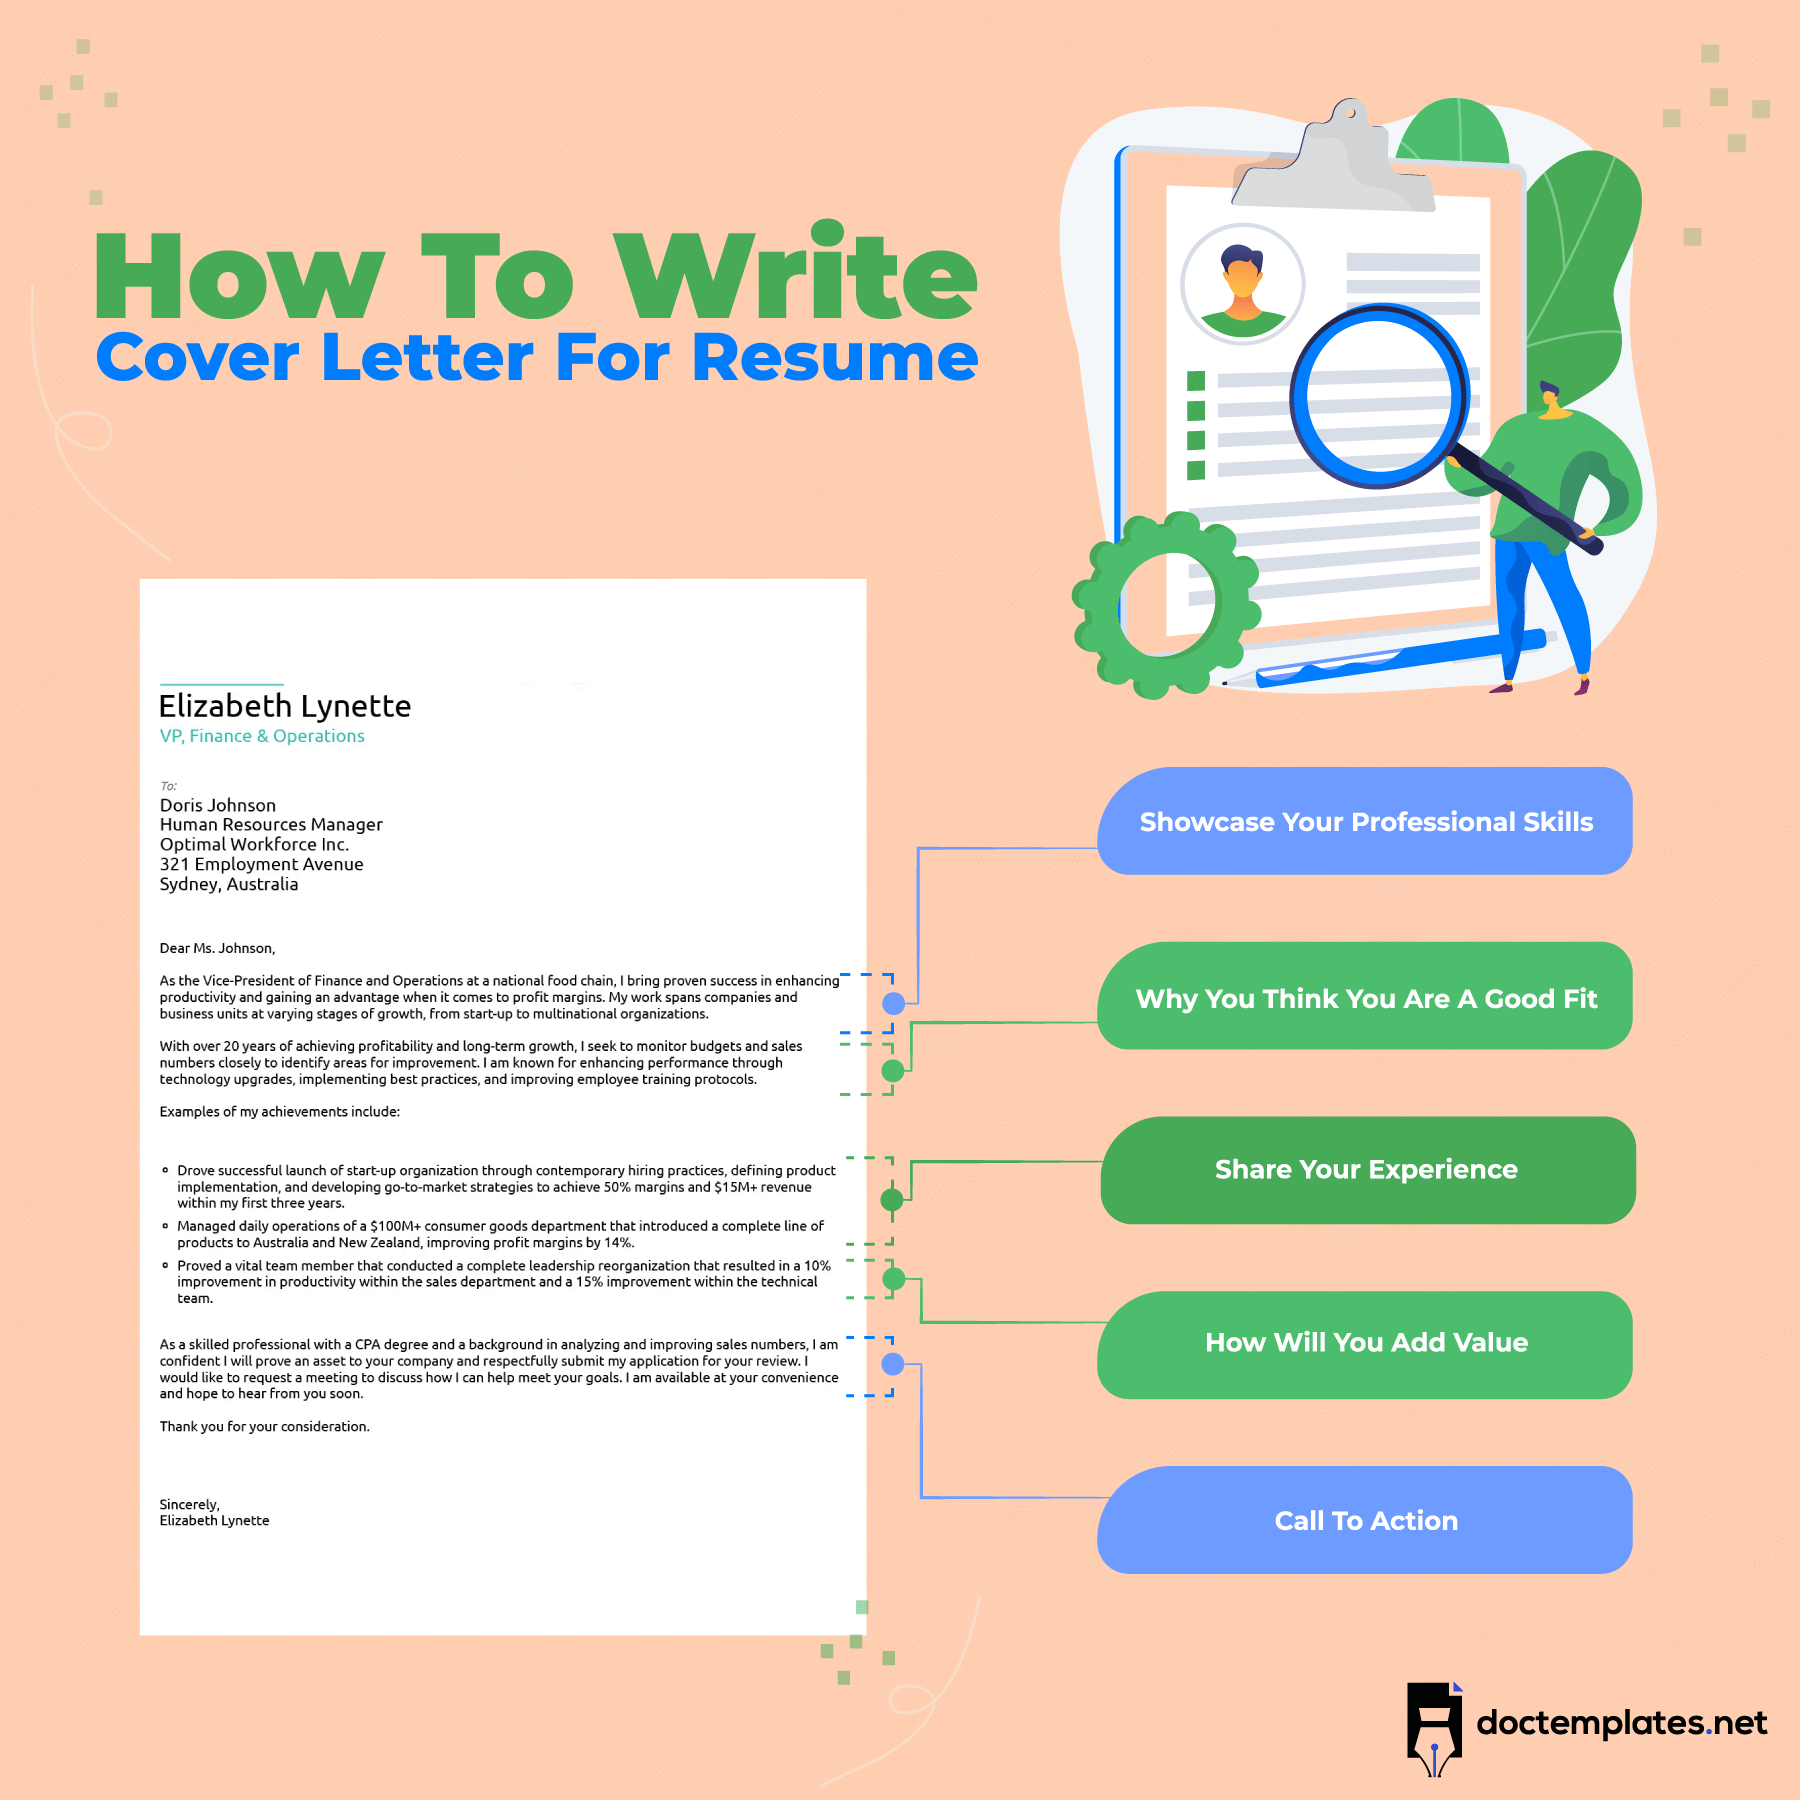 This infographic is about writing resume cover letter.